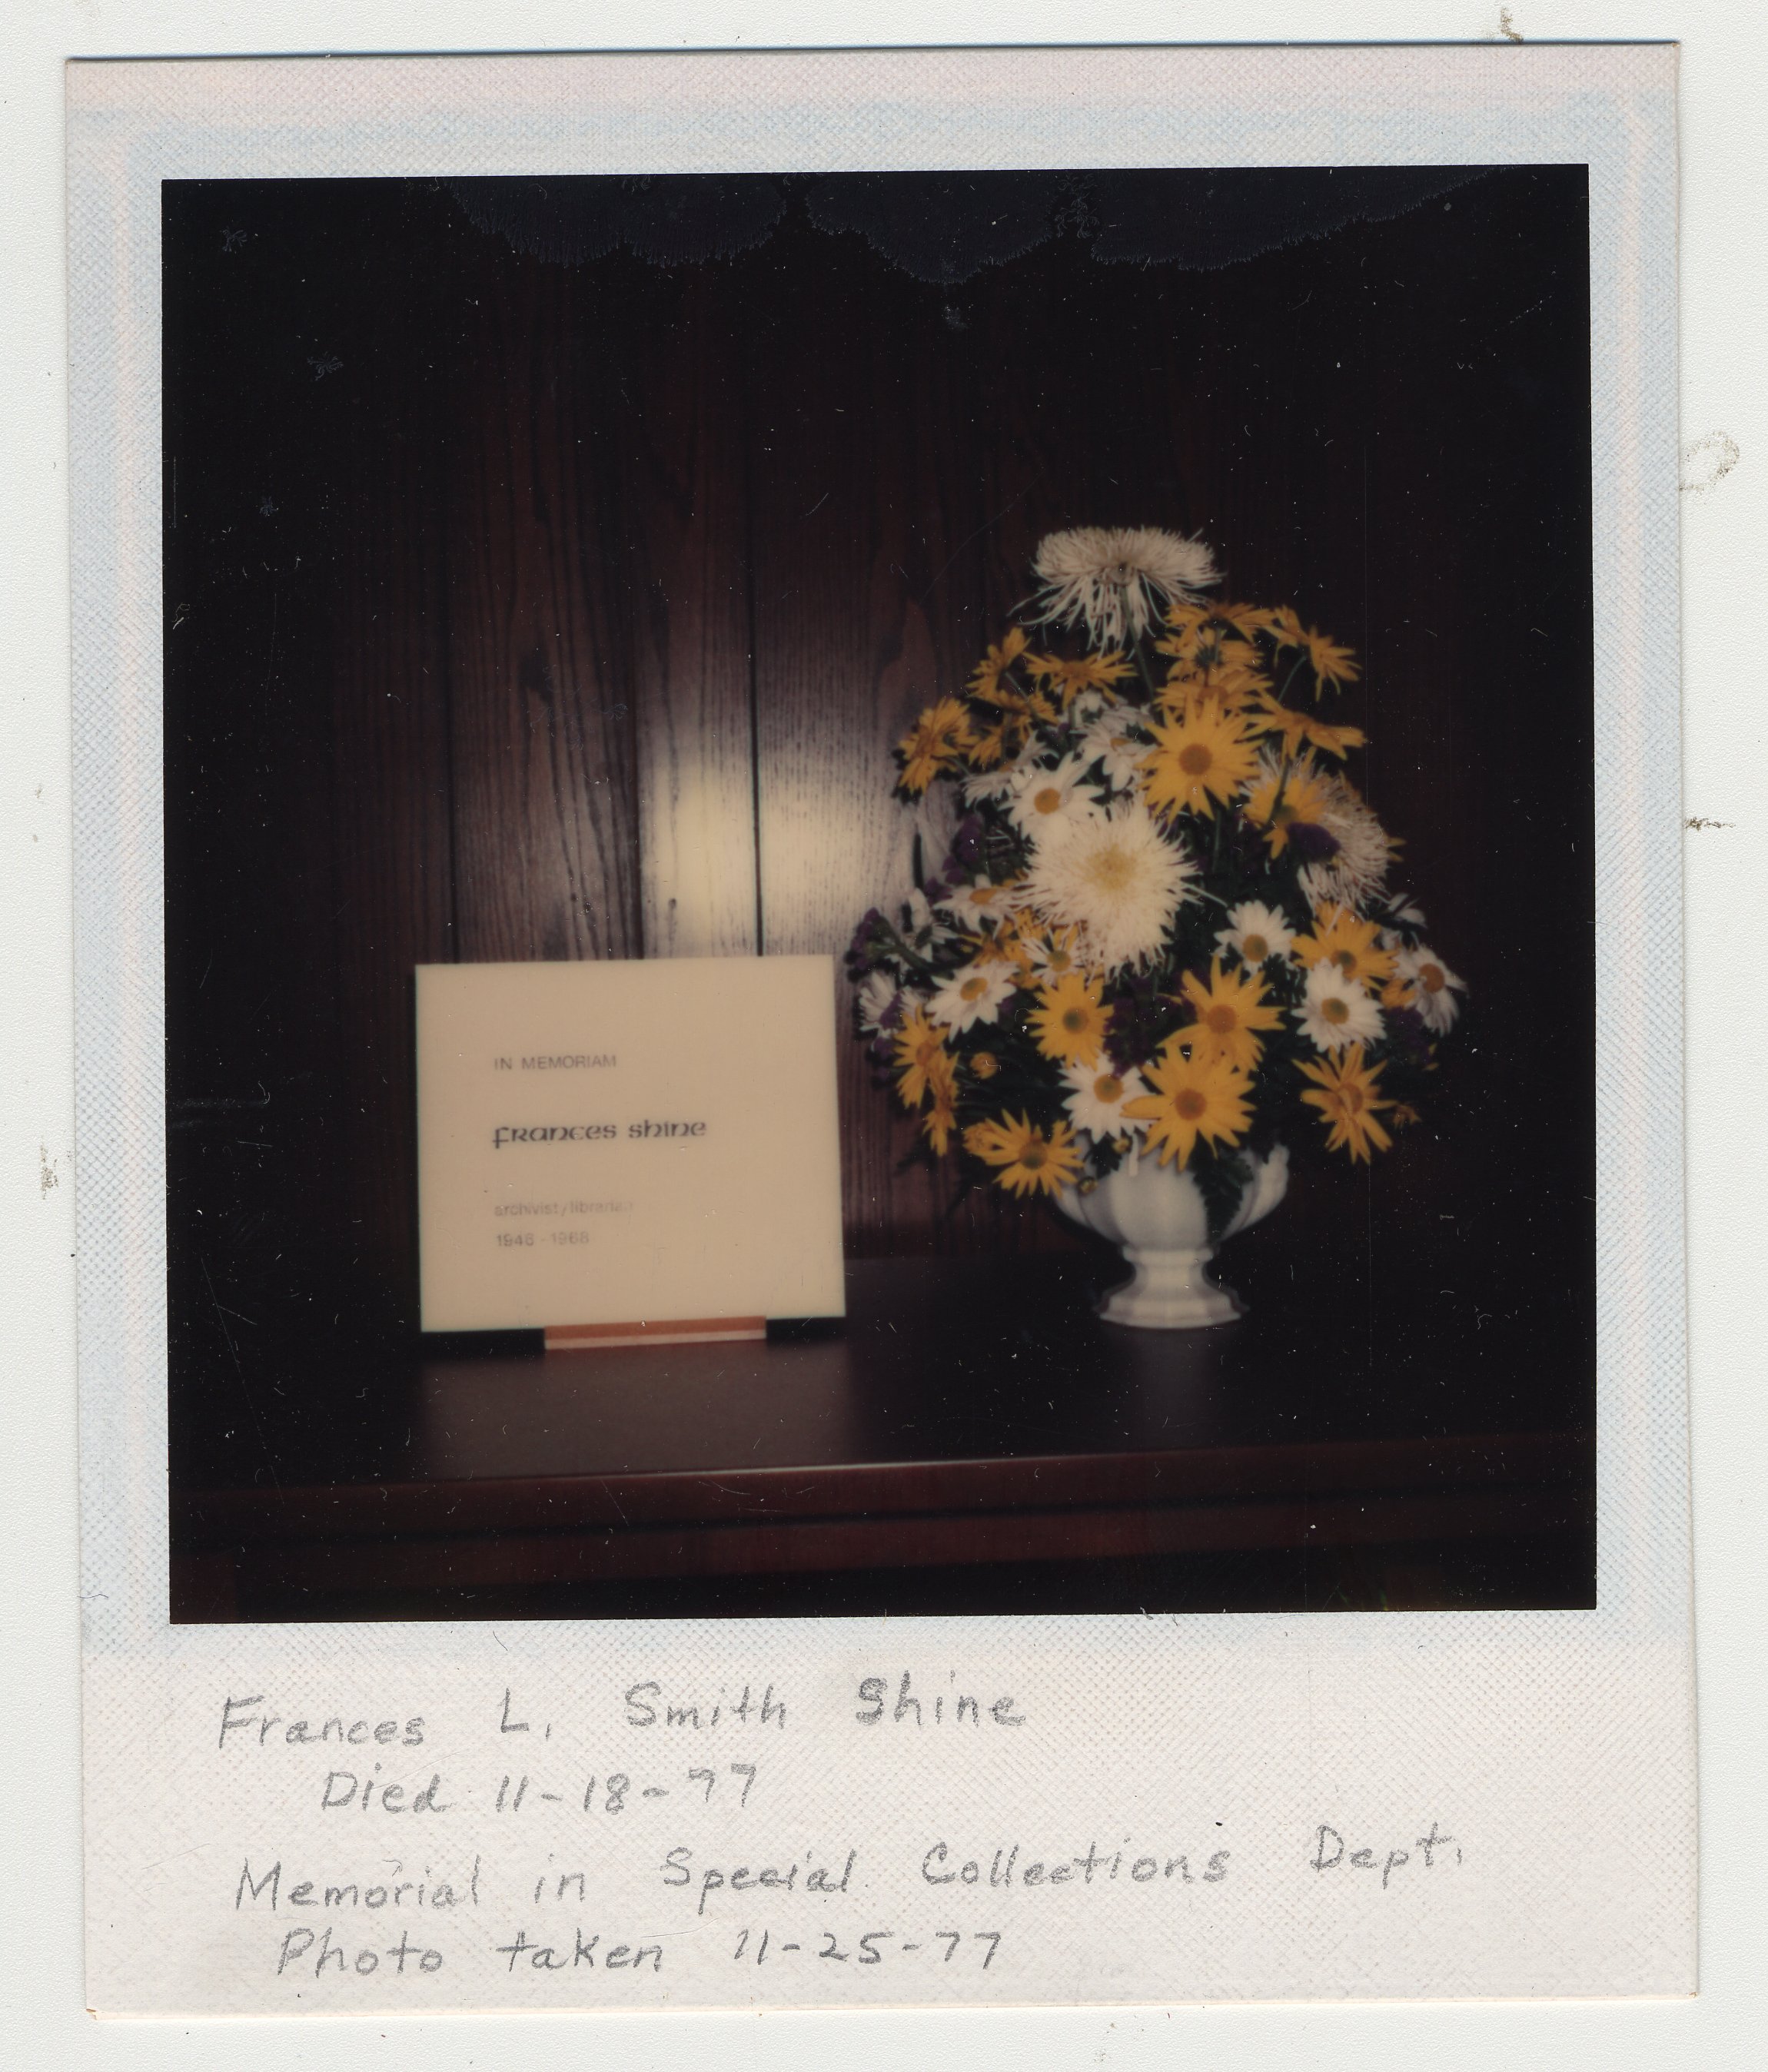 A flower arrangement sits beside a memorial in Special Collections that